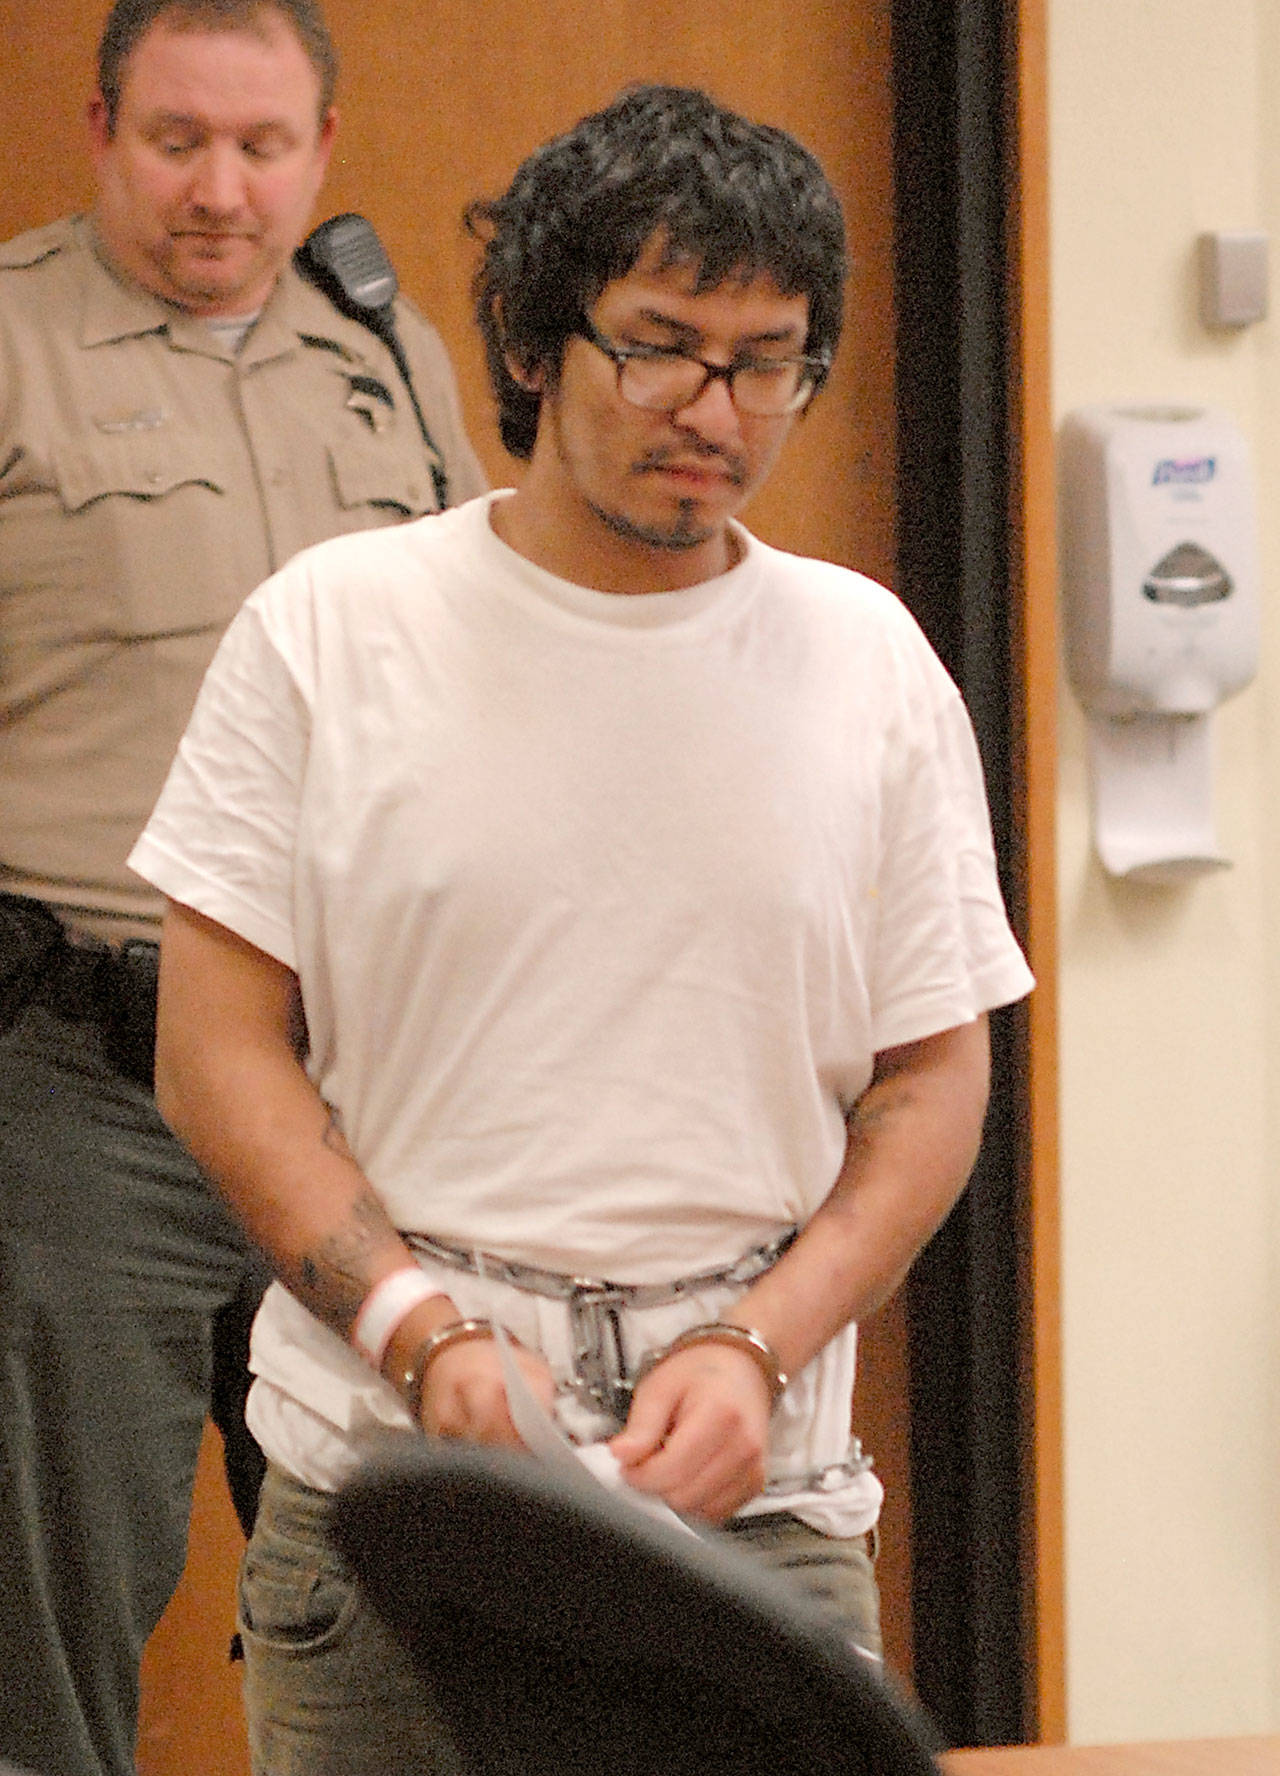 Alejandro Cendejas-Montoya makes his first appearance in Clallam County Superior Court in Port Angeles on Wednesday on charges related to his alleged assault on a corrections officer and escape from jail in Forks. (Keith Thorpe/Peninsula Daily News)